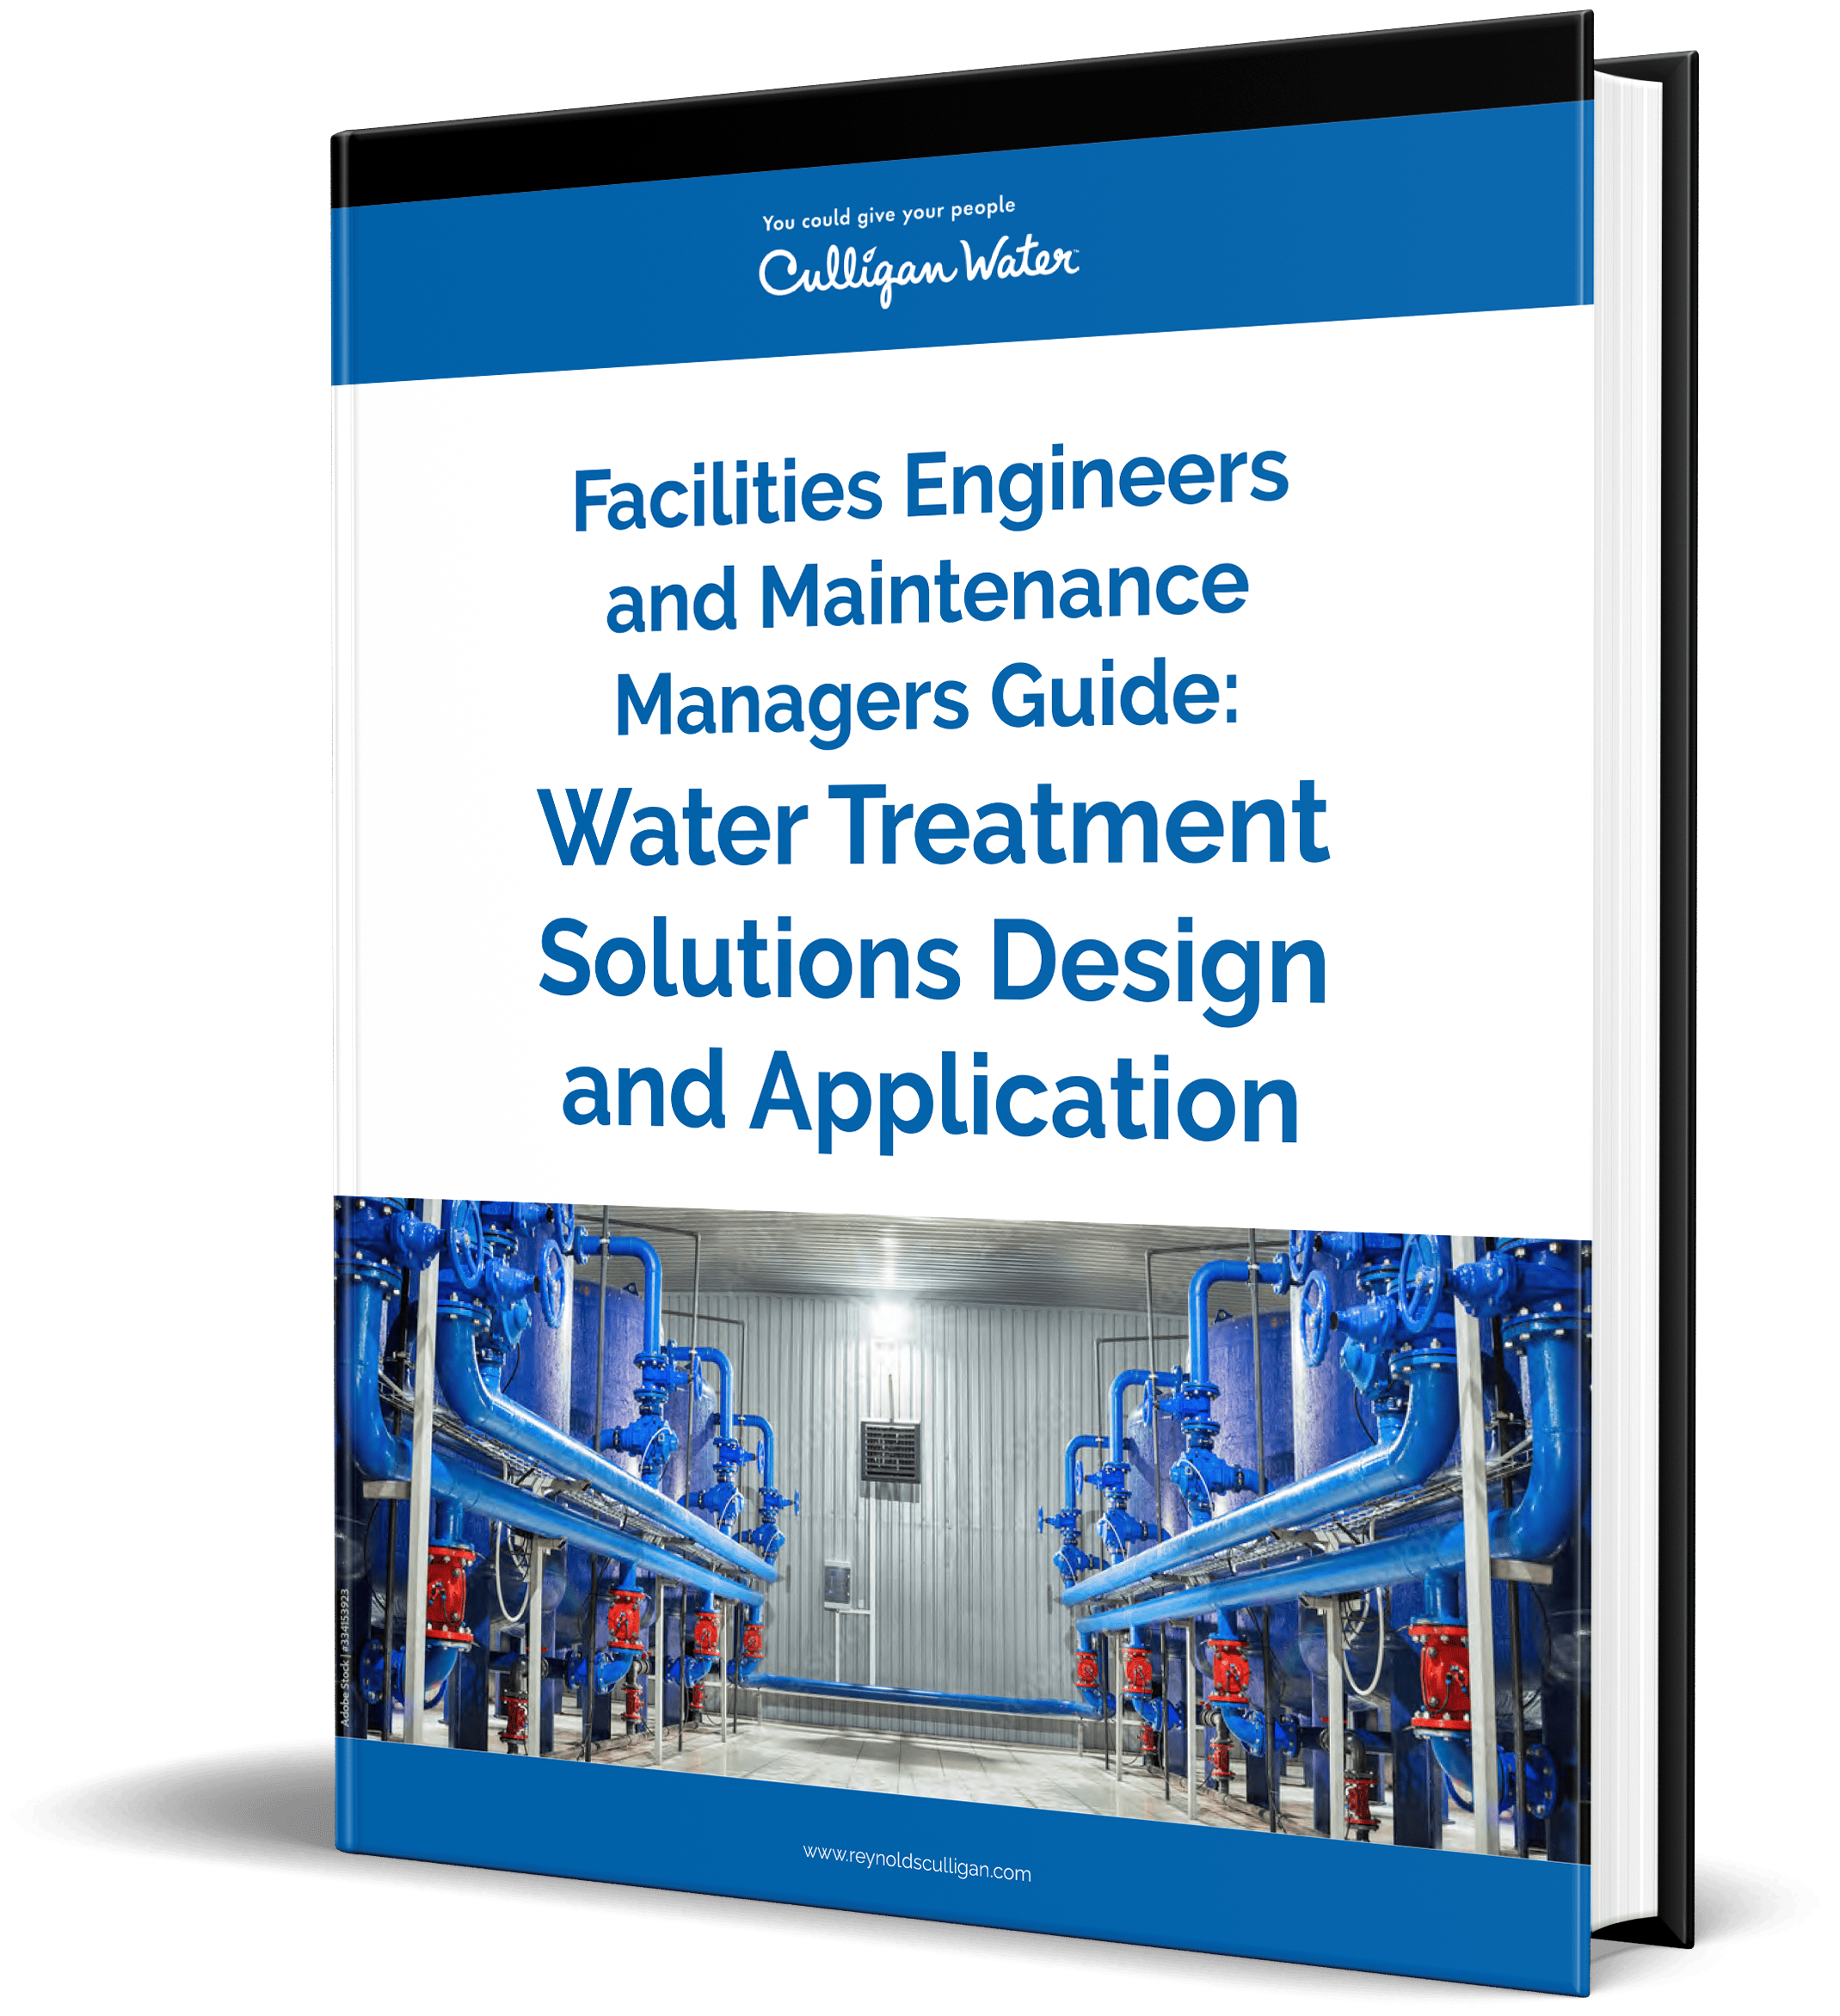 Water Treatment Solutions Design and Application